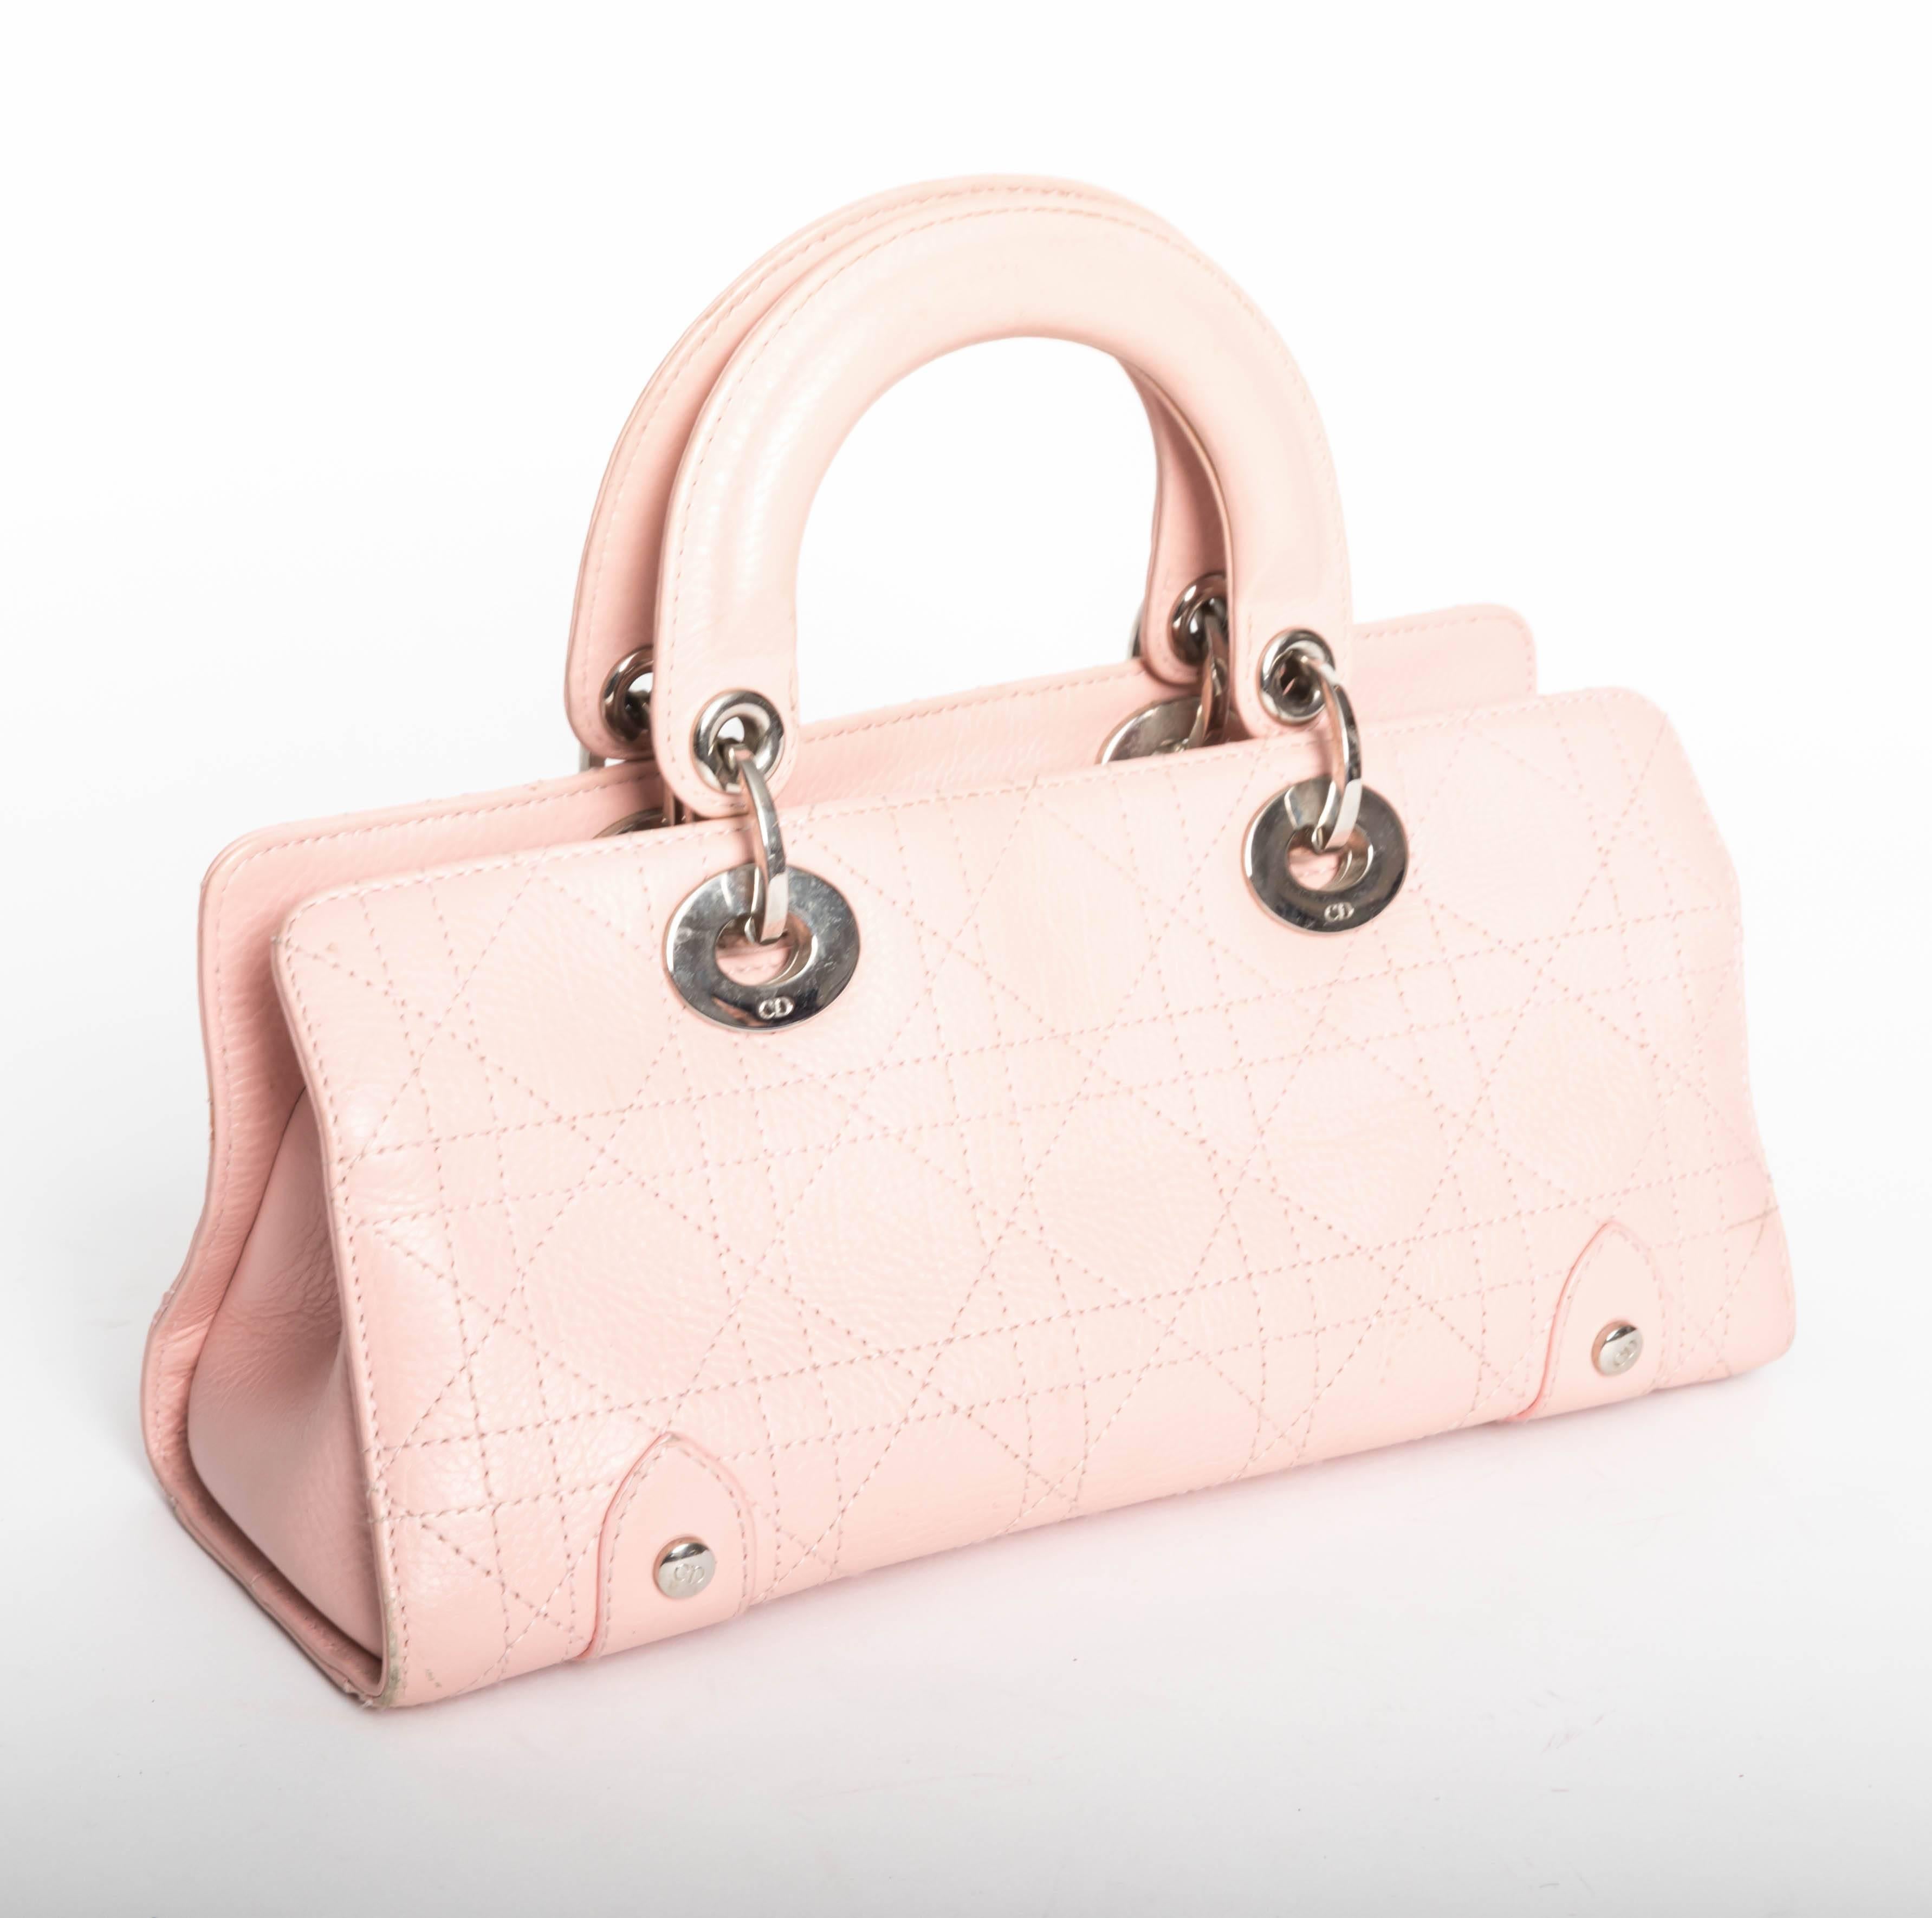 Very chic Christian Dior bag in pink cannage.
Exterior is in very good condition. Some marks to interior lining.
